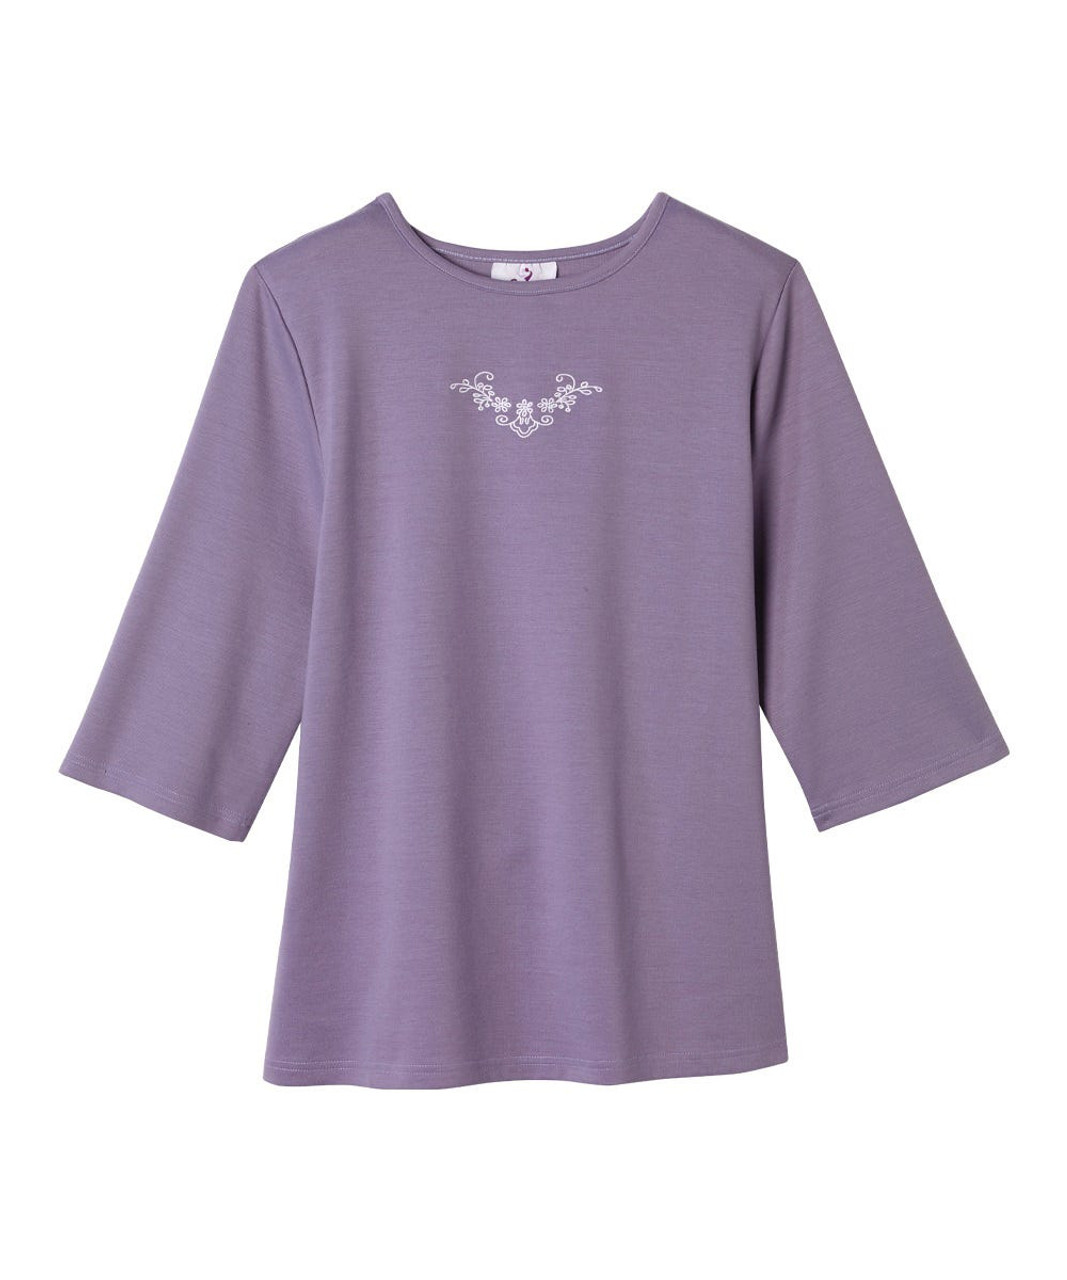 Silverts SV24700 Warm Winter Weight Adaptive Clothing Top for Women Lilac, Size=M, SV24700-SV95-M